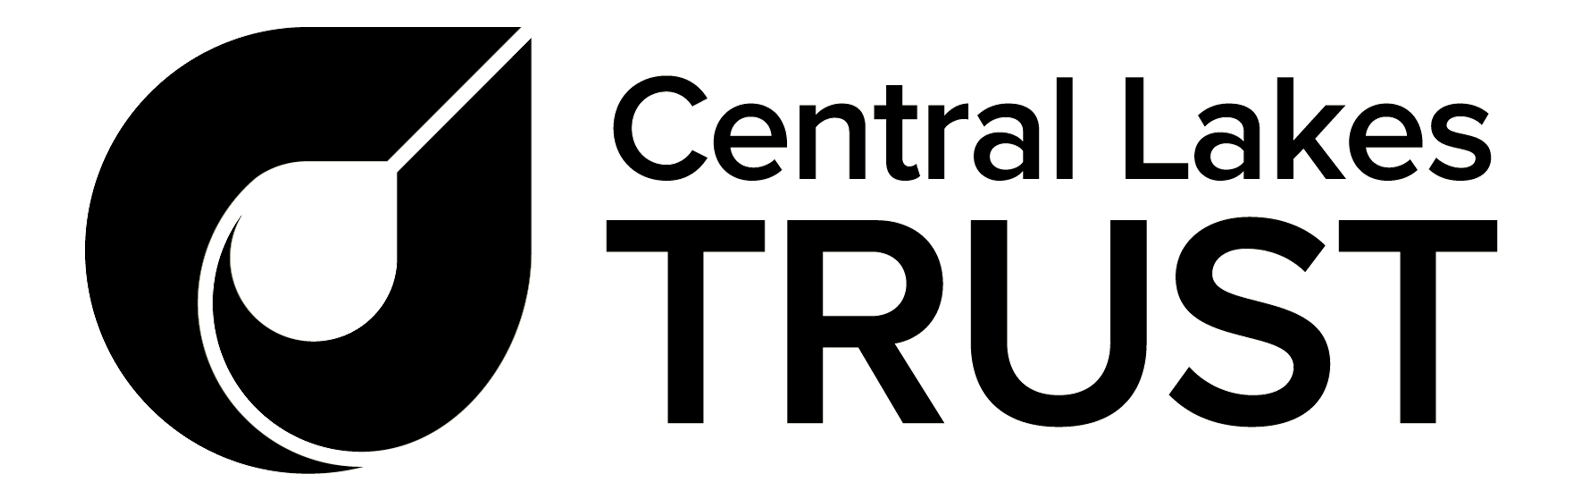 Central Lakes Trust Logo